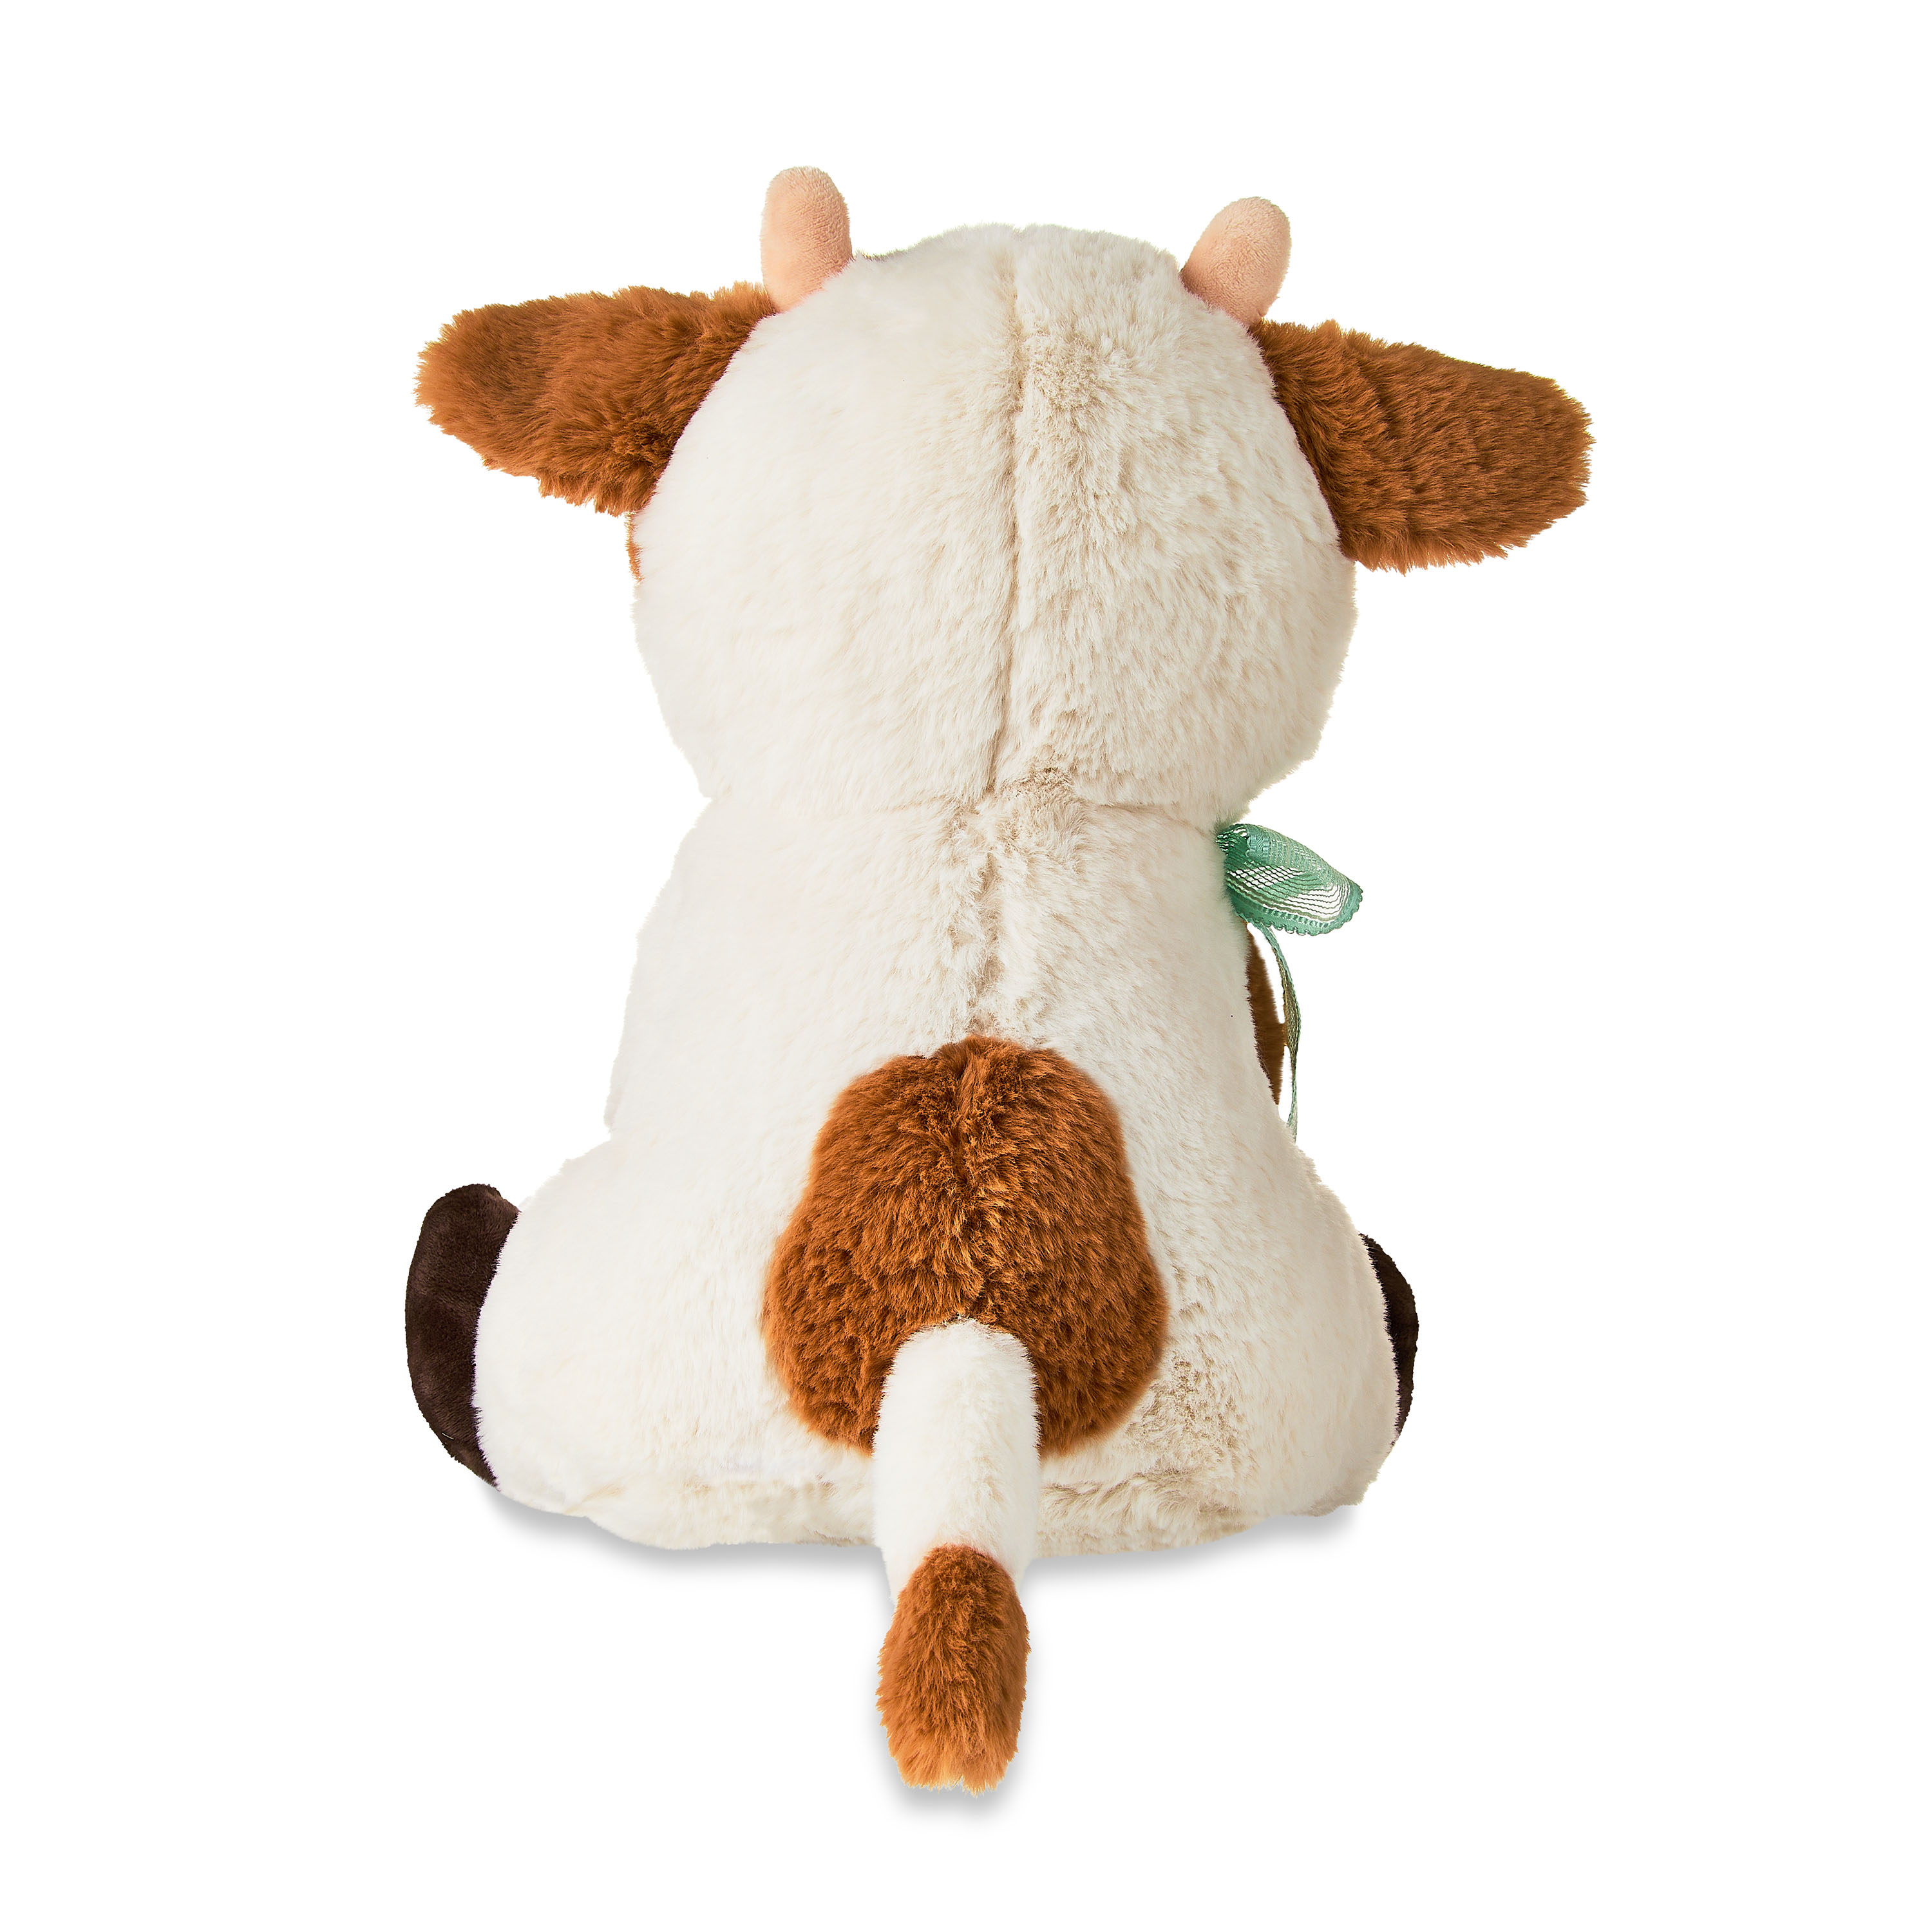 Mother's Day Mommy and Me Cow Plush, 13", by Way To Celebrate,assembled product height 13.5inch, for 3 Year and up - image 4 of 5